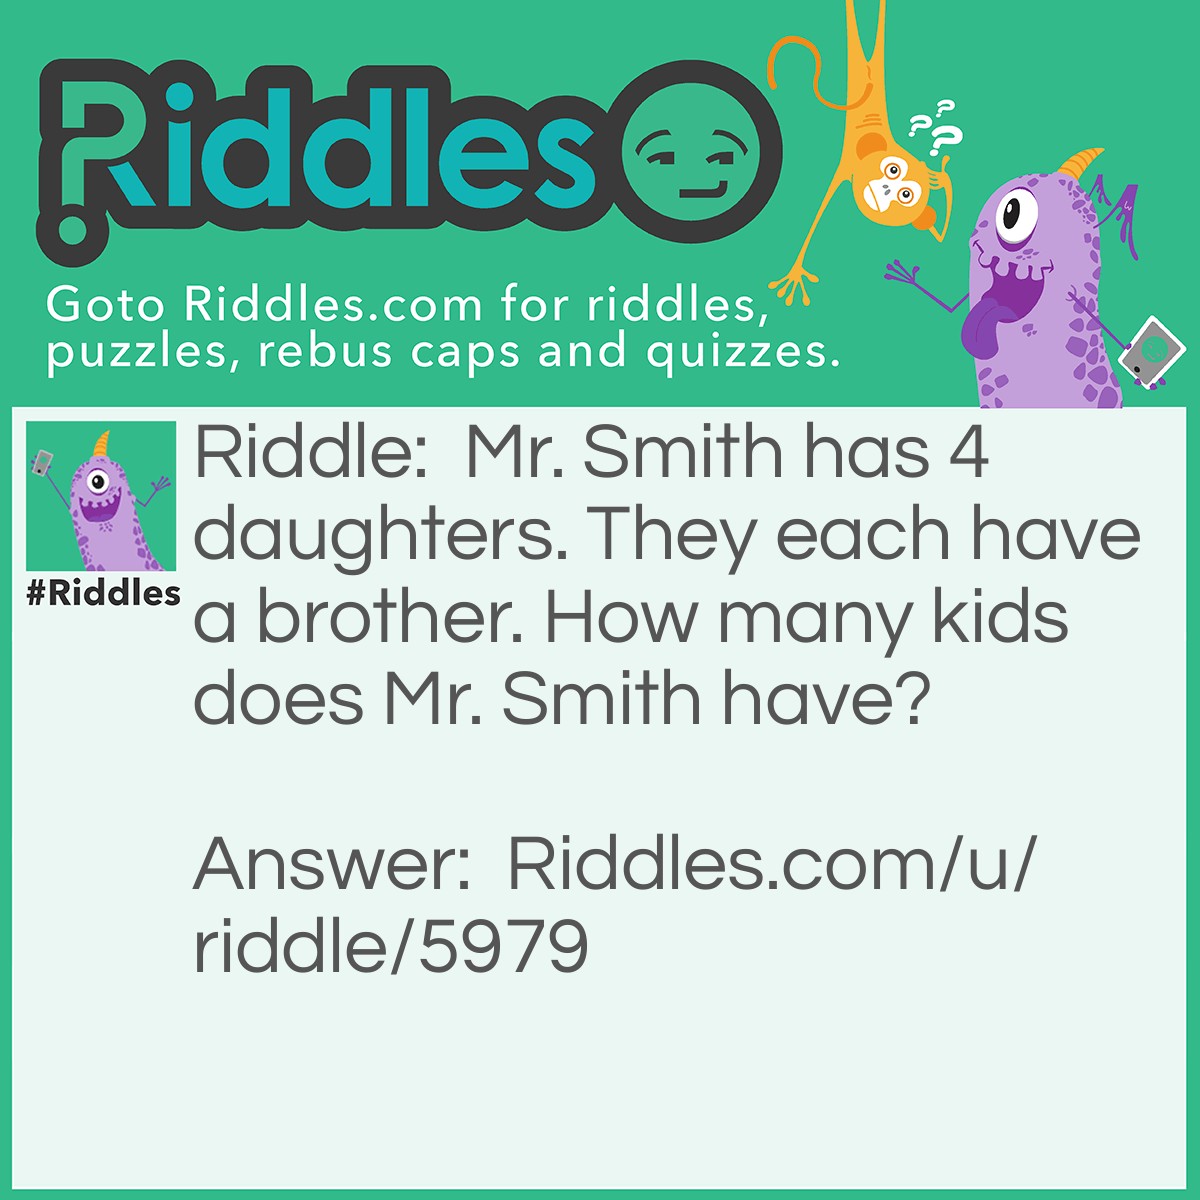 Riddle: Mr. Smith has 4 daughters. They each have a brother. How many kids does Mr. Smith have? Answer: Five, because Mr. Smith's daughters share a brother, so they all have a brother.